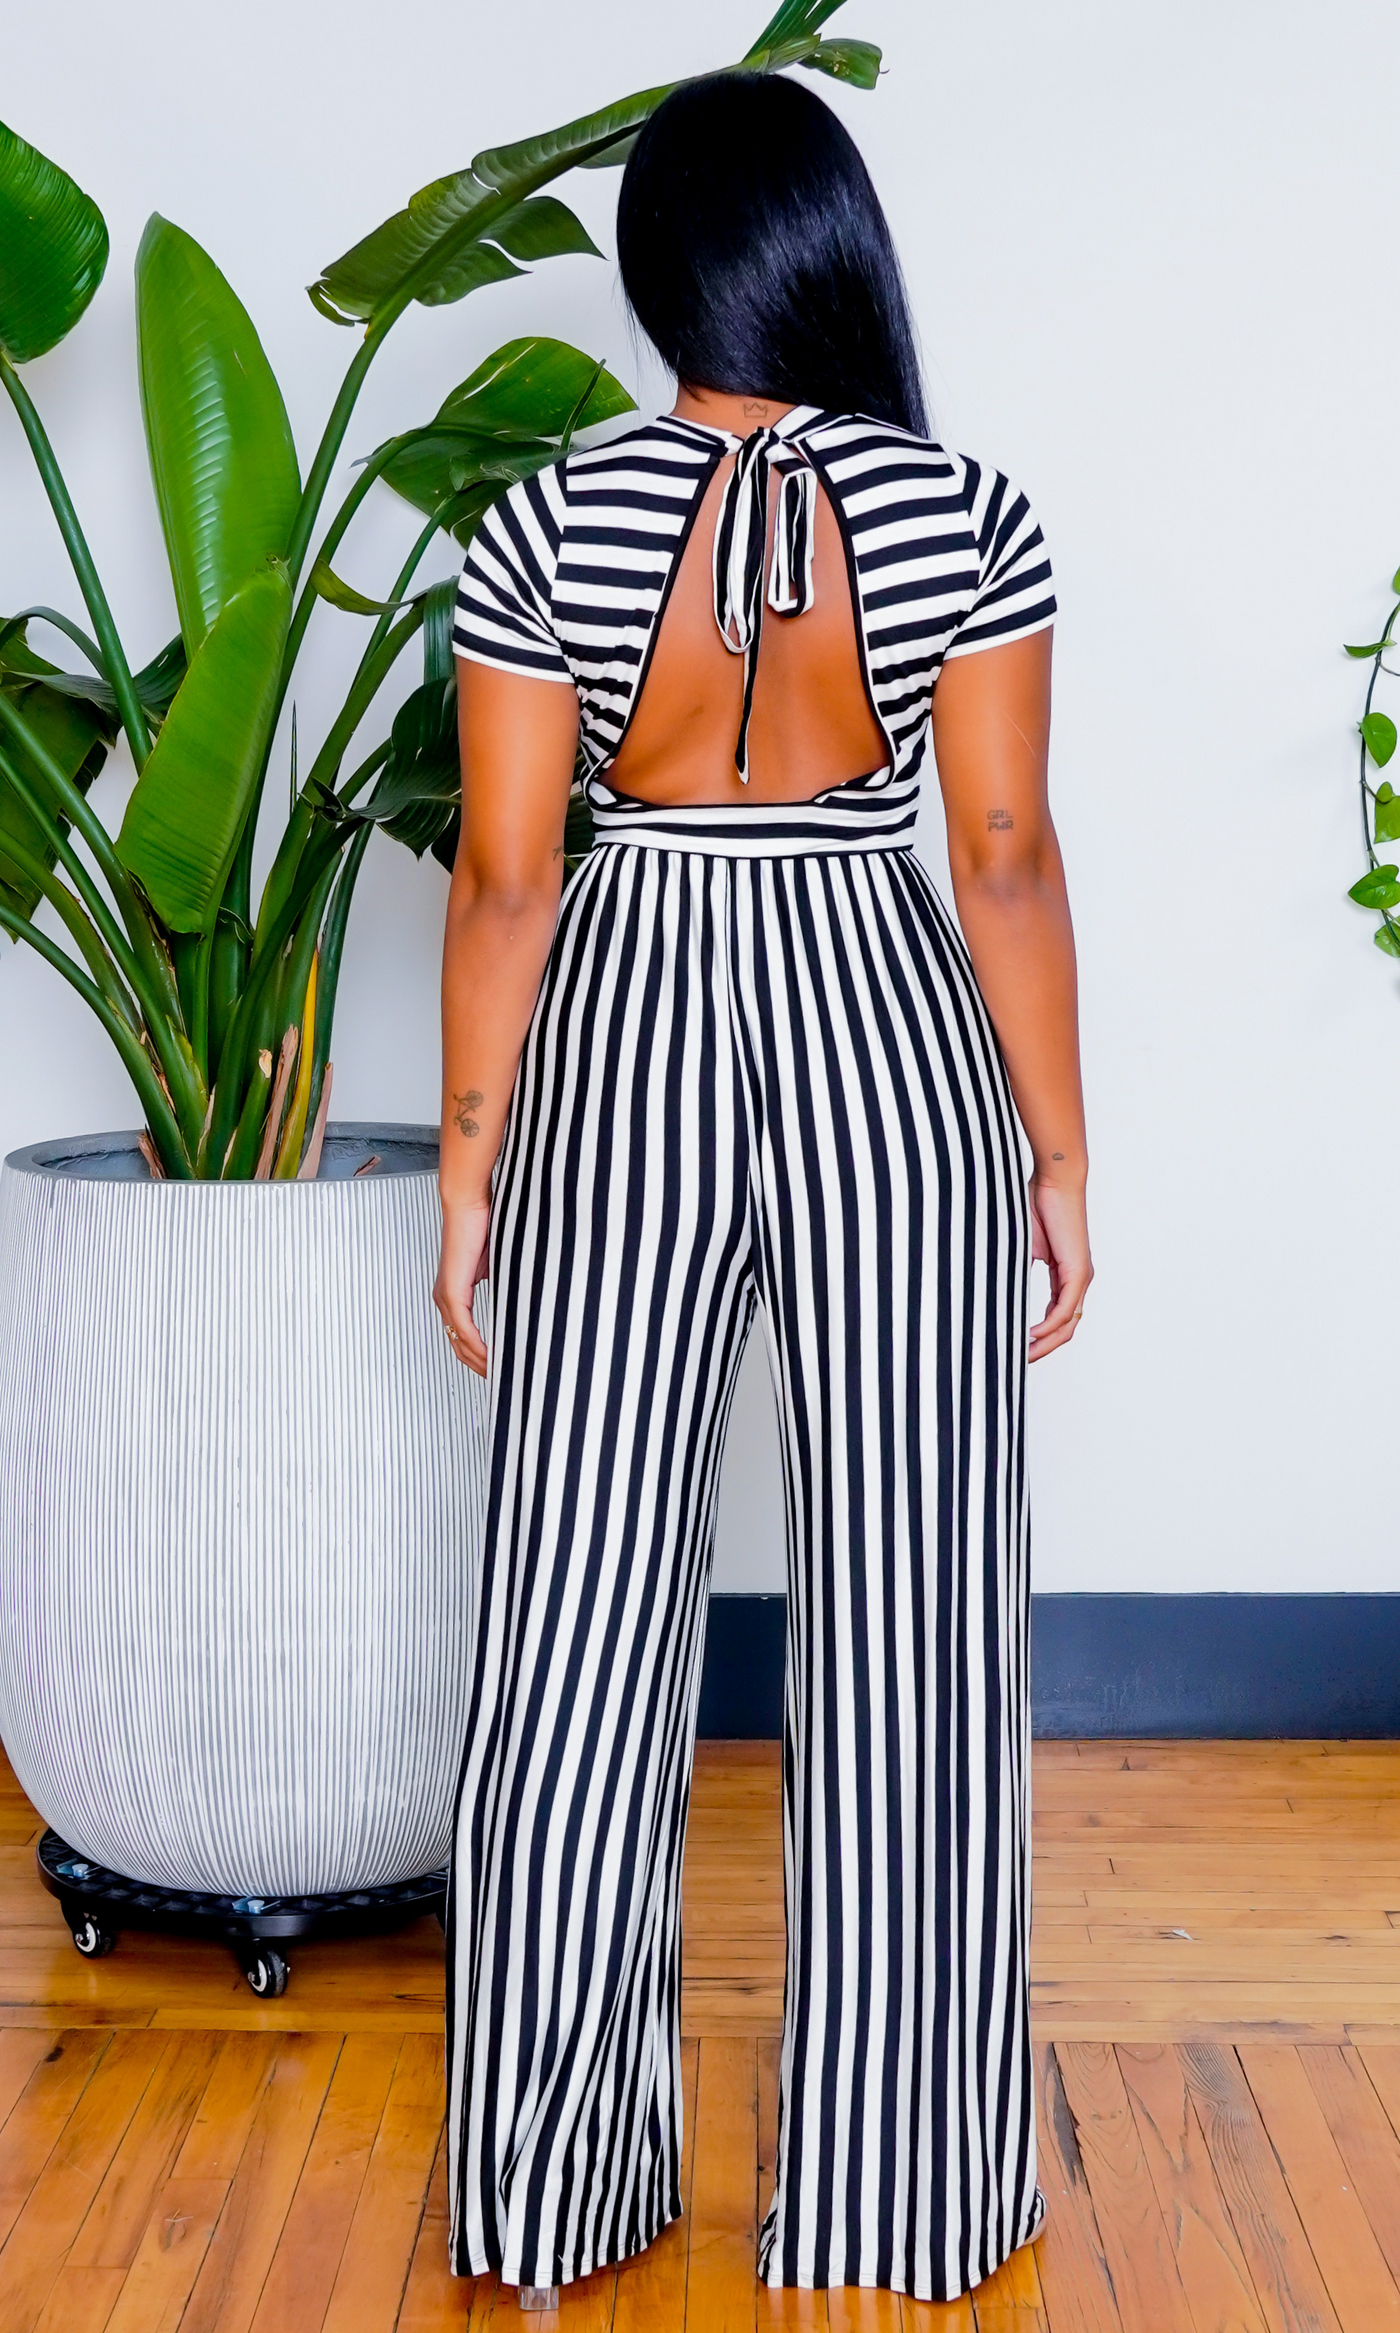 Eye Catching | Open Back Jumpsuit - Black & White - Cutely Covered